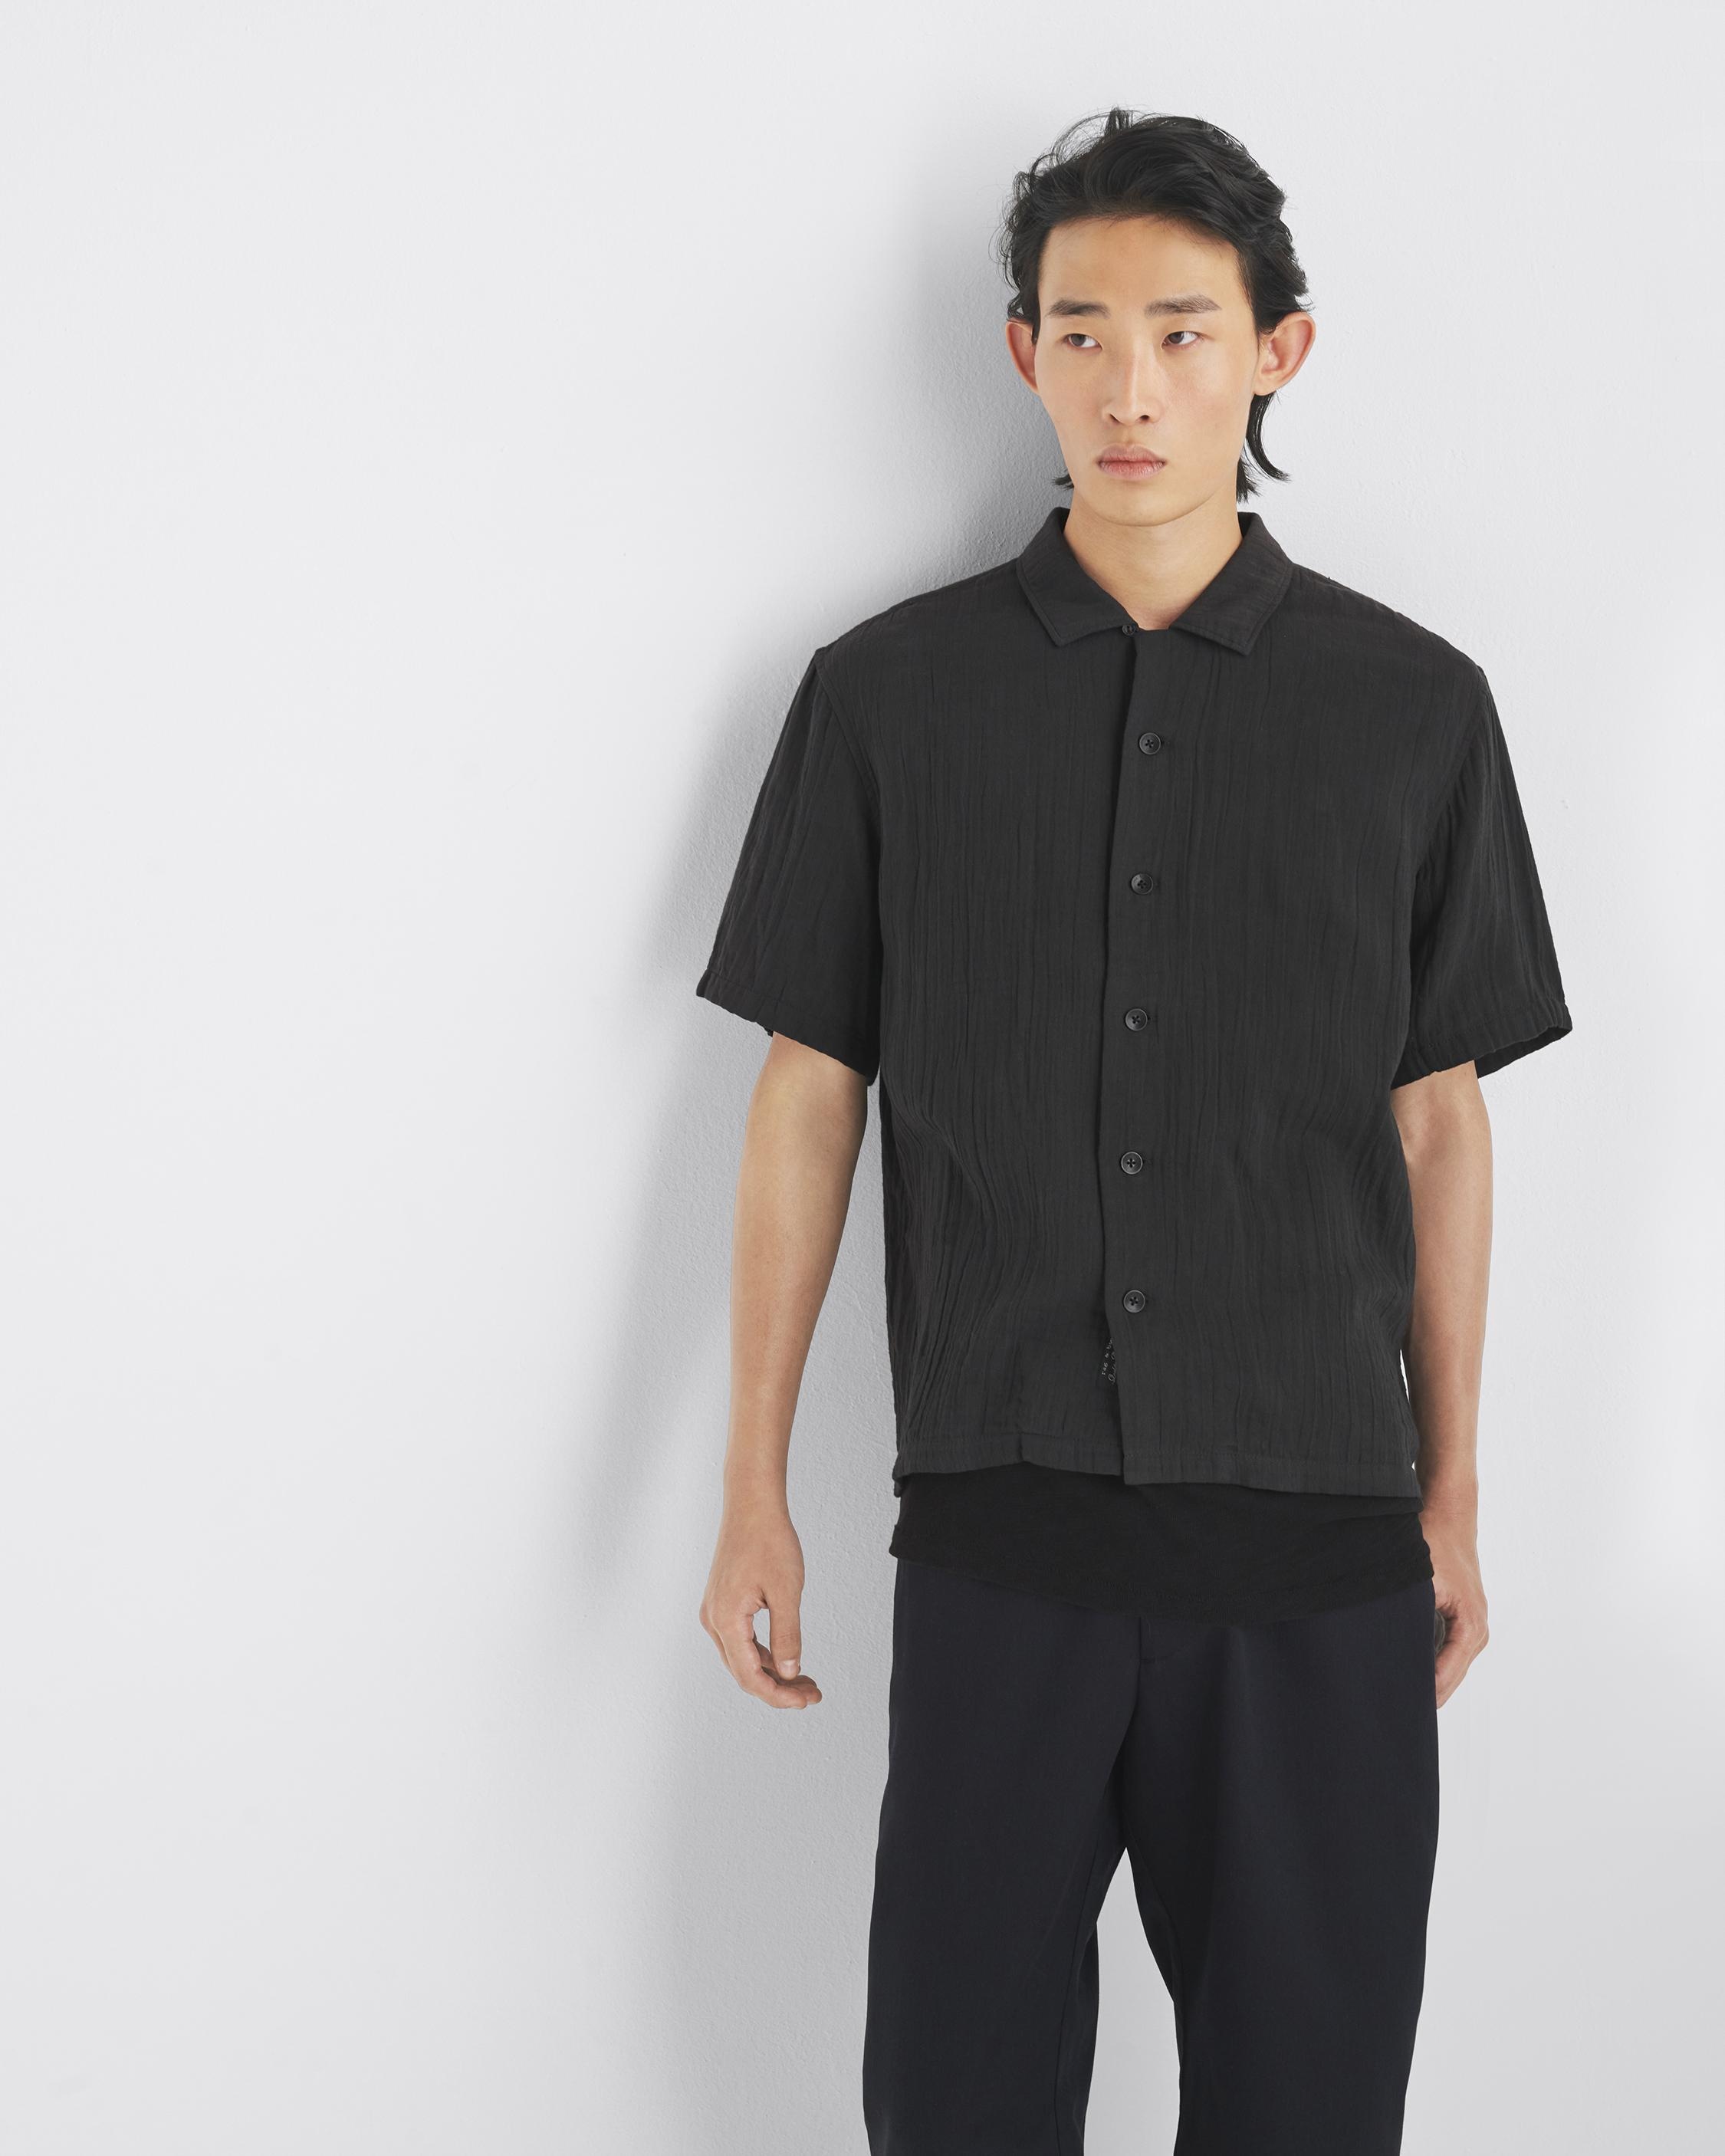 Resort Avery Gauze Shirt
Relaxed Fit Button Down - 6